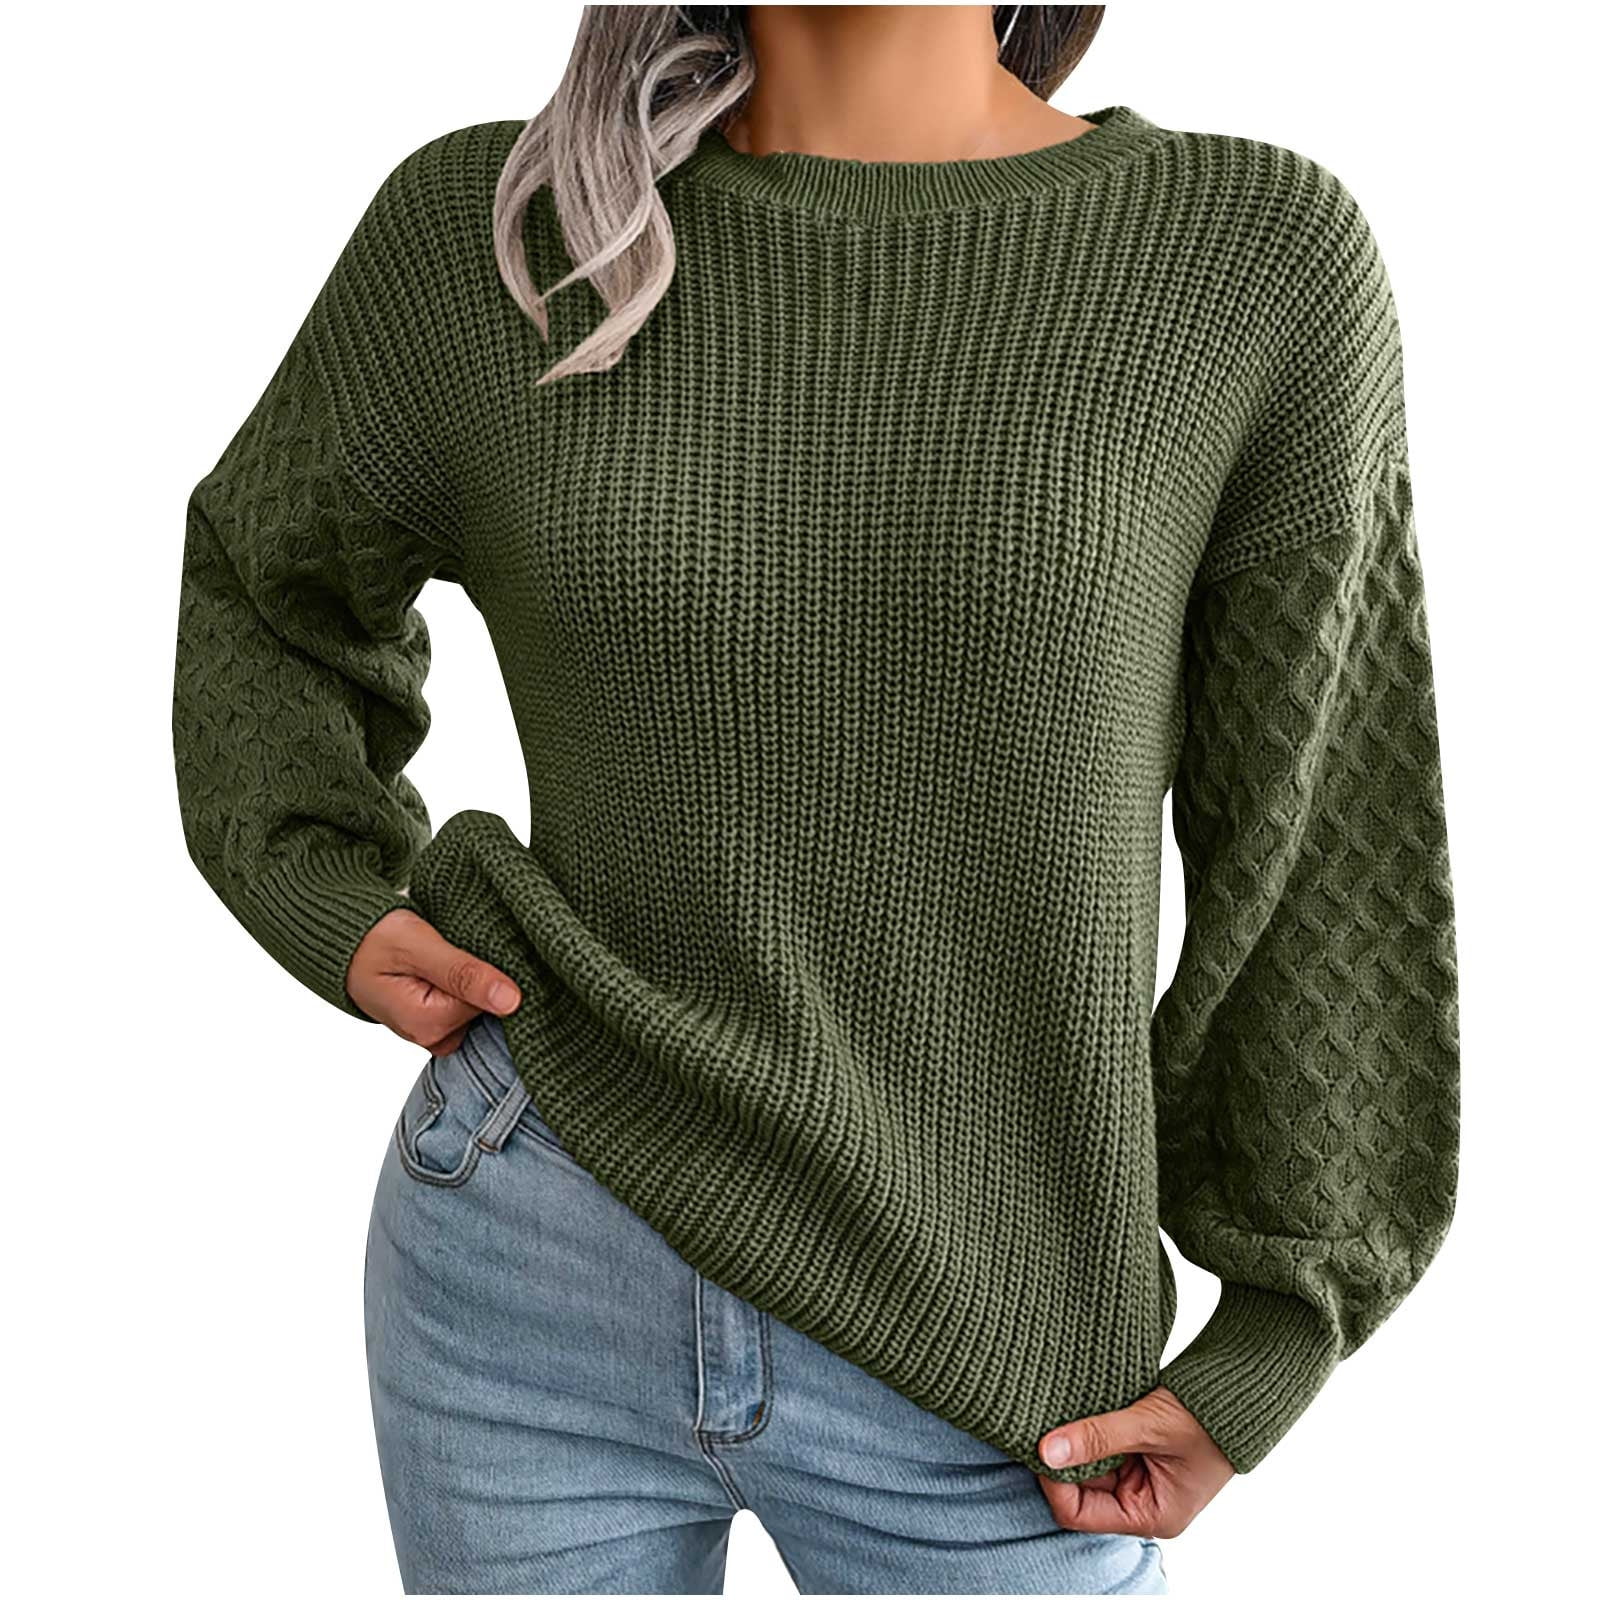 Hinvhai Plus Sweater Tops On Seasonal Clearance Women's Colorful Long Sleeve off Shoulder Knit Sweater Crew Neck Sweater Army Green 8(L) - Walmart.com